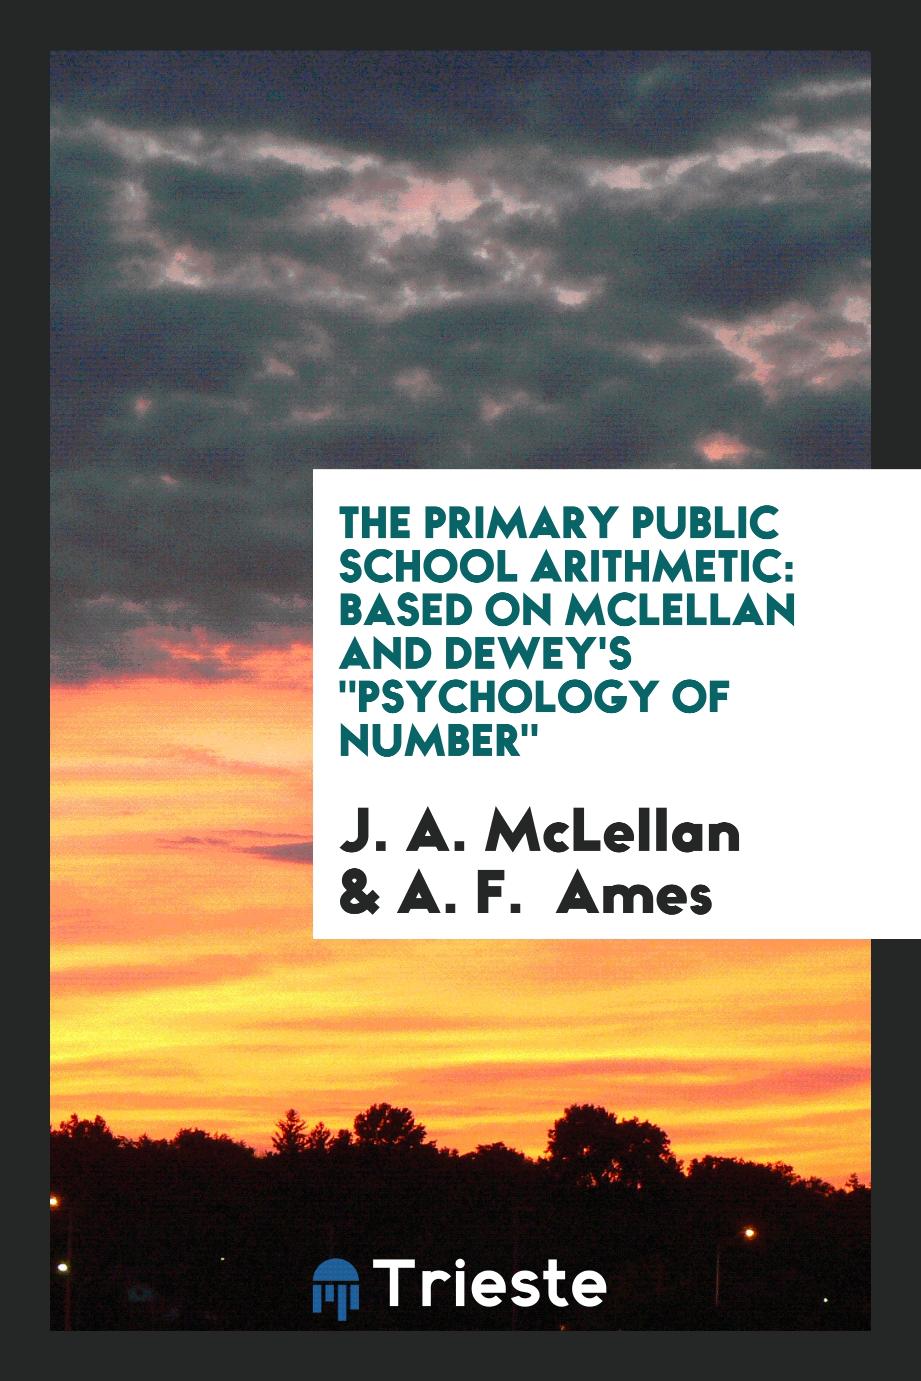 The Primary Public School Arithmetic: Based on McLellan and Dewey's "Psychology of Number"